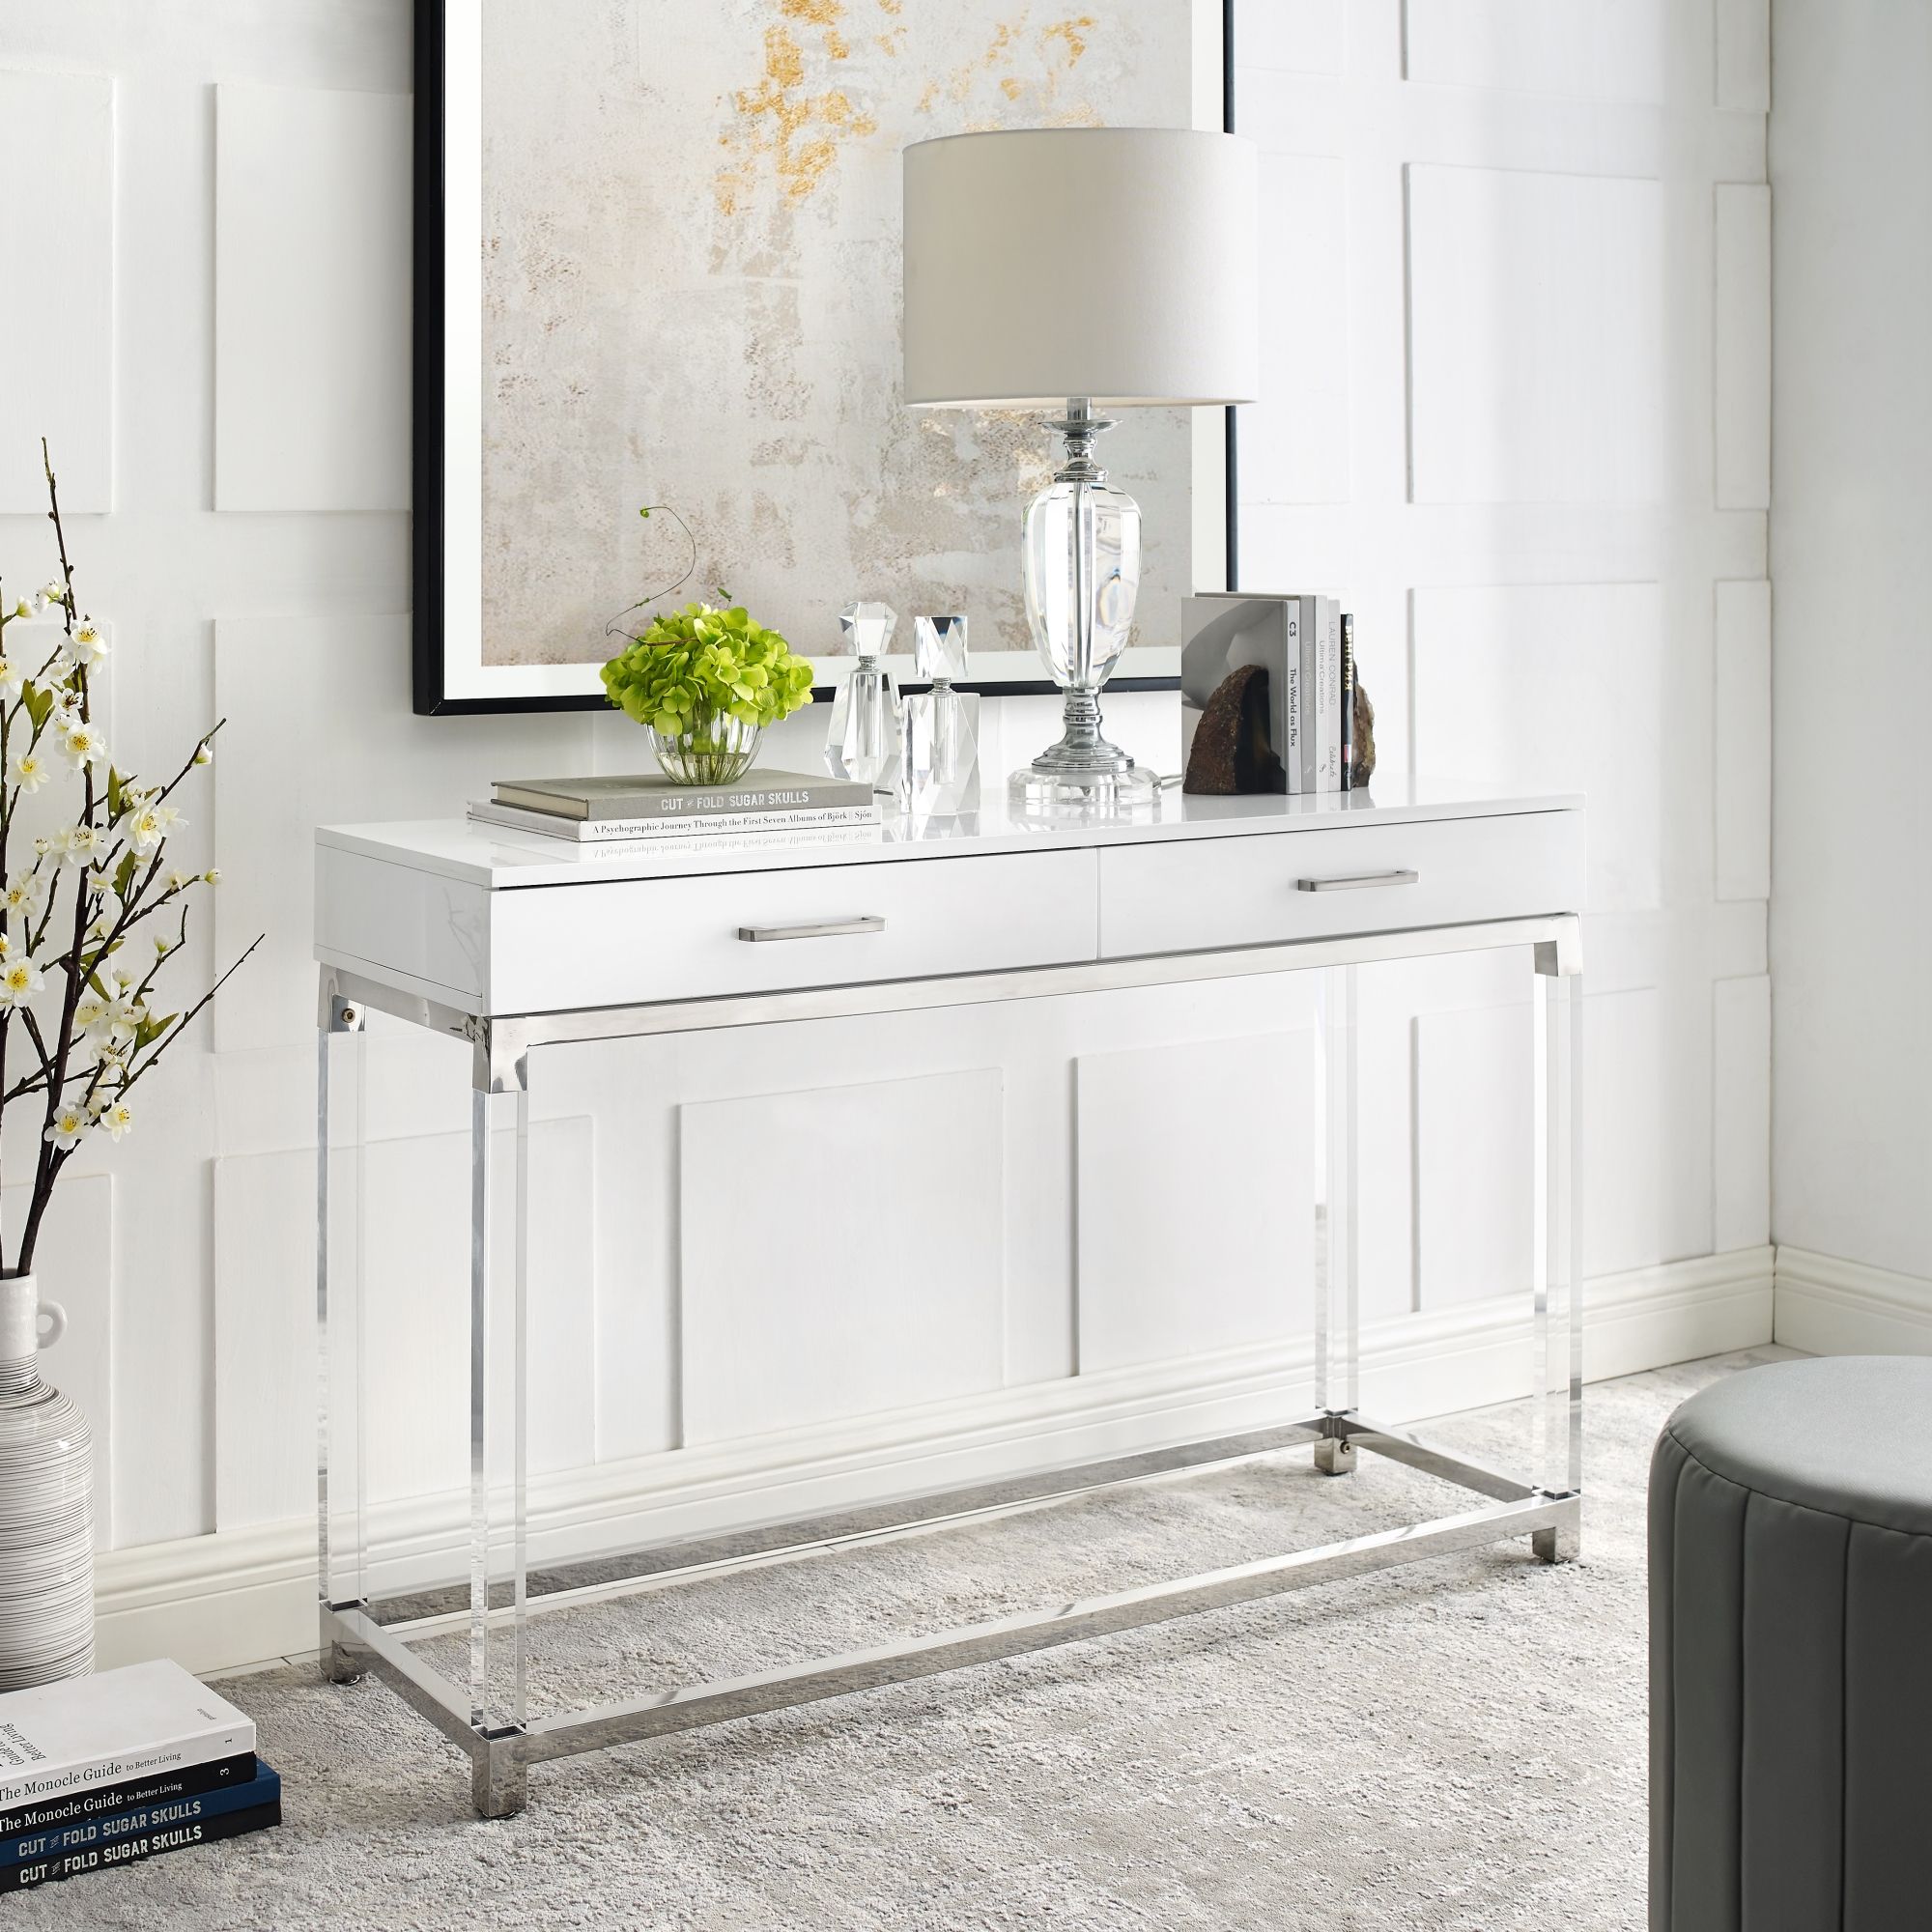 Inspired Home Alena Console Table 2 Drawers High Gloss Acrylic Legs Intended For Mirrored And Chrome Modern Console Tables (View 12 of 20)